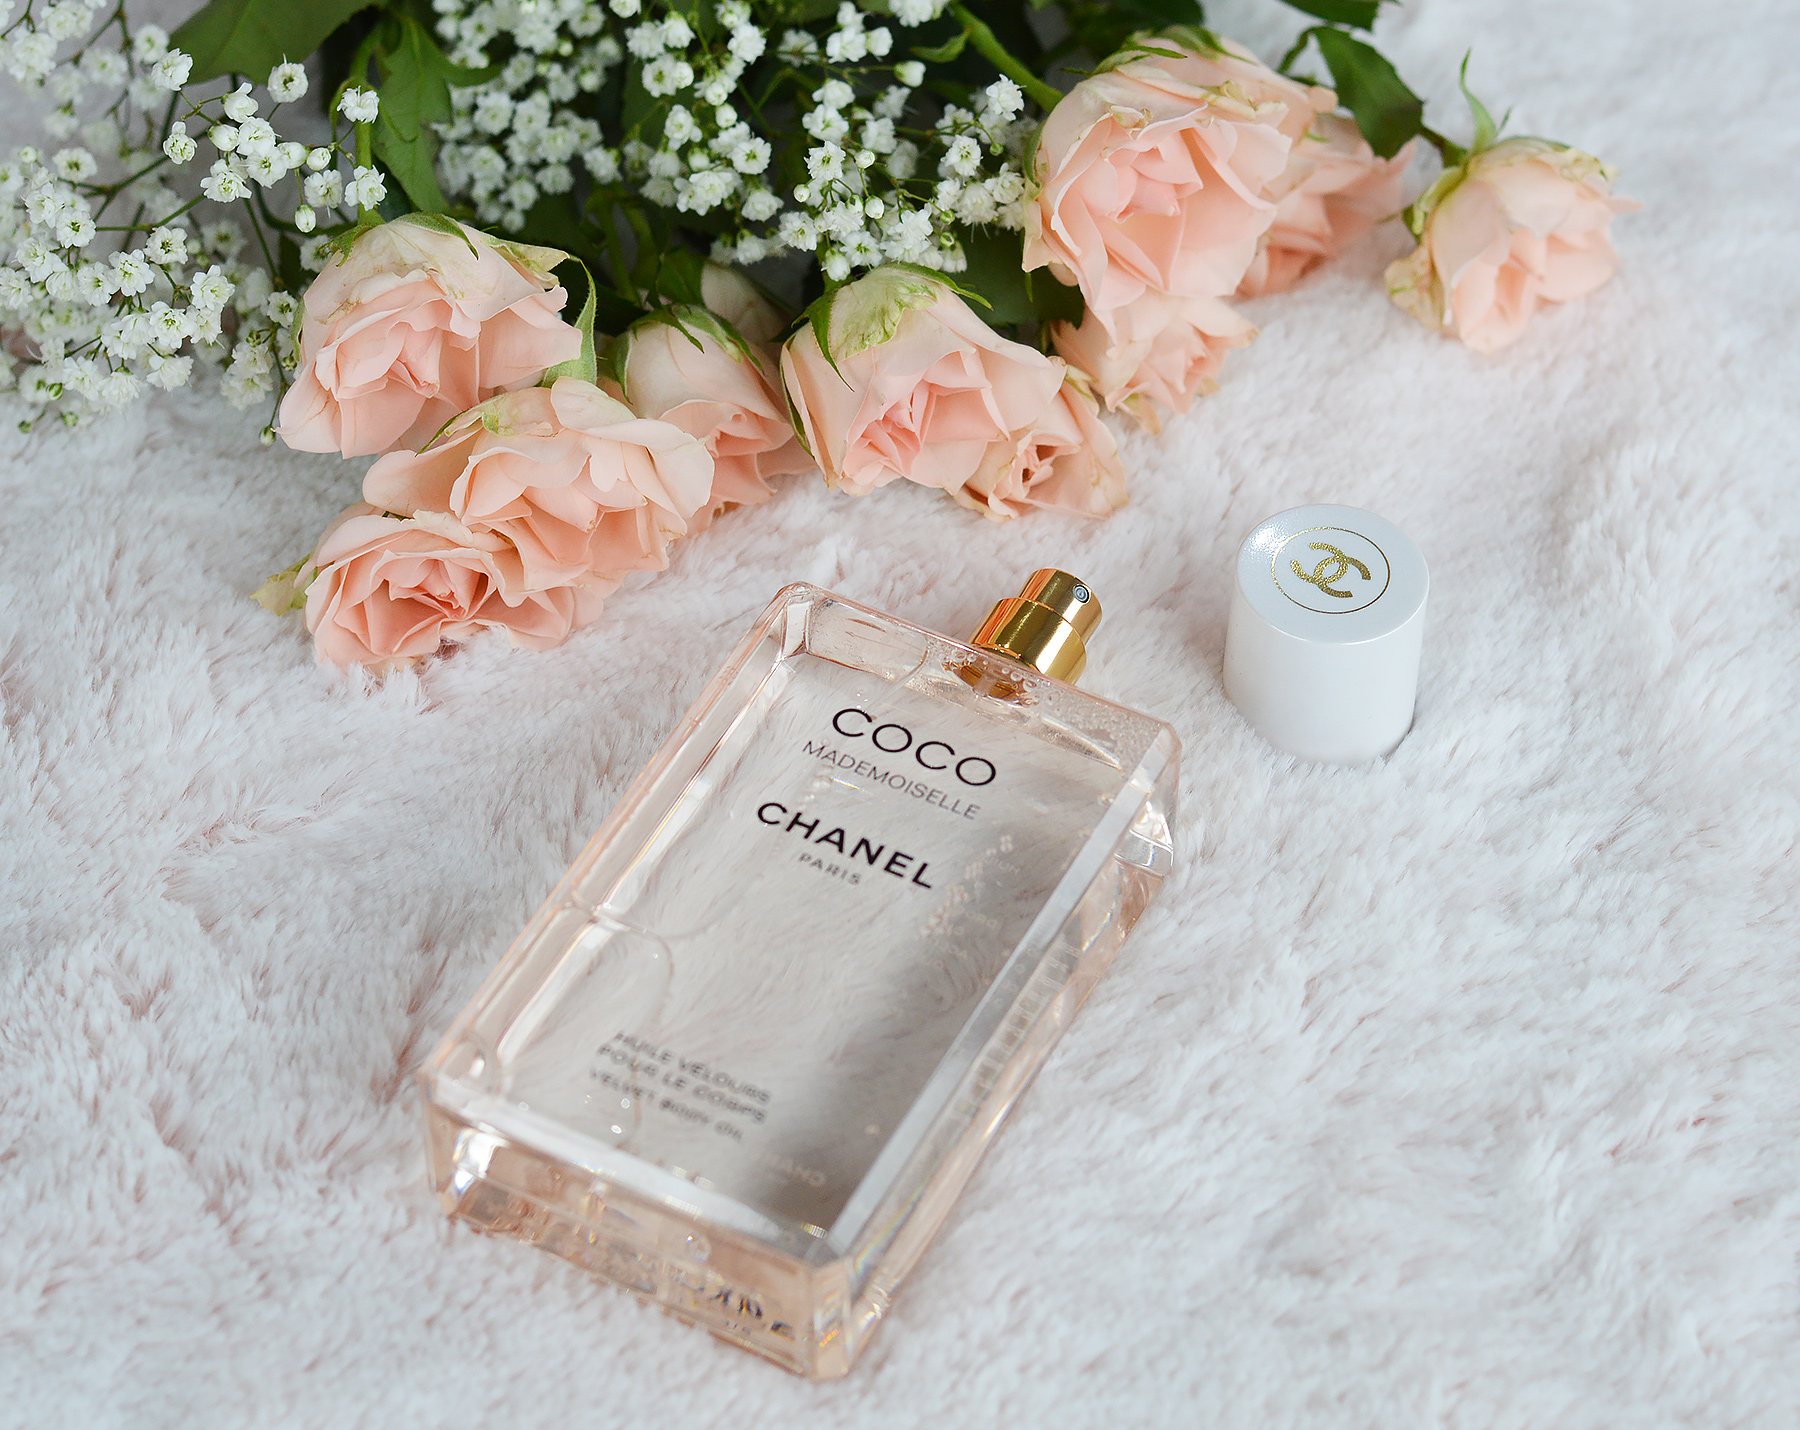 Chanel Coco Mademoiselle Body Lotion Oil Spray 